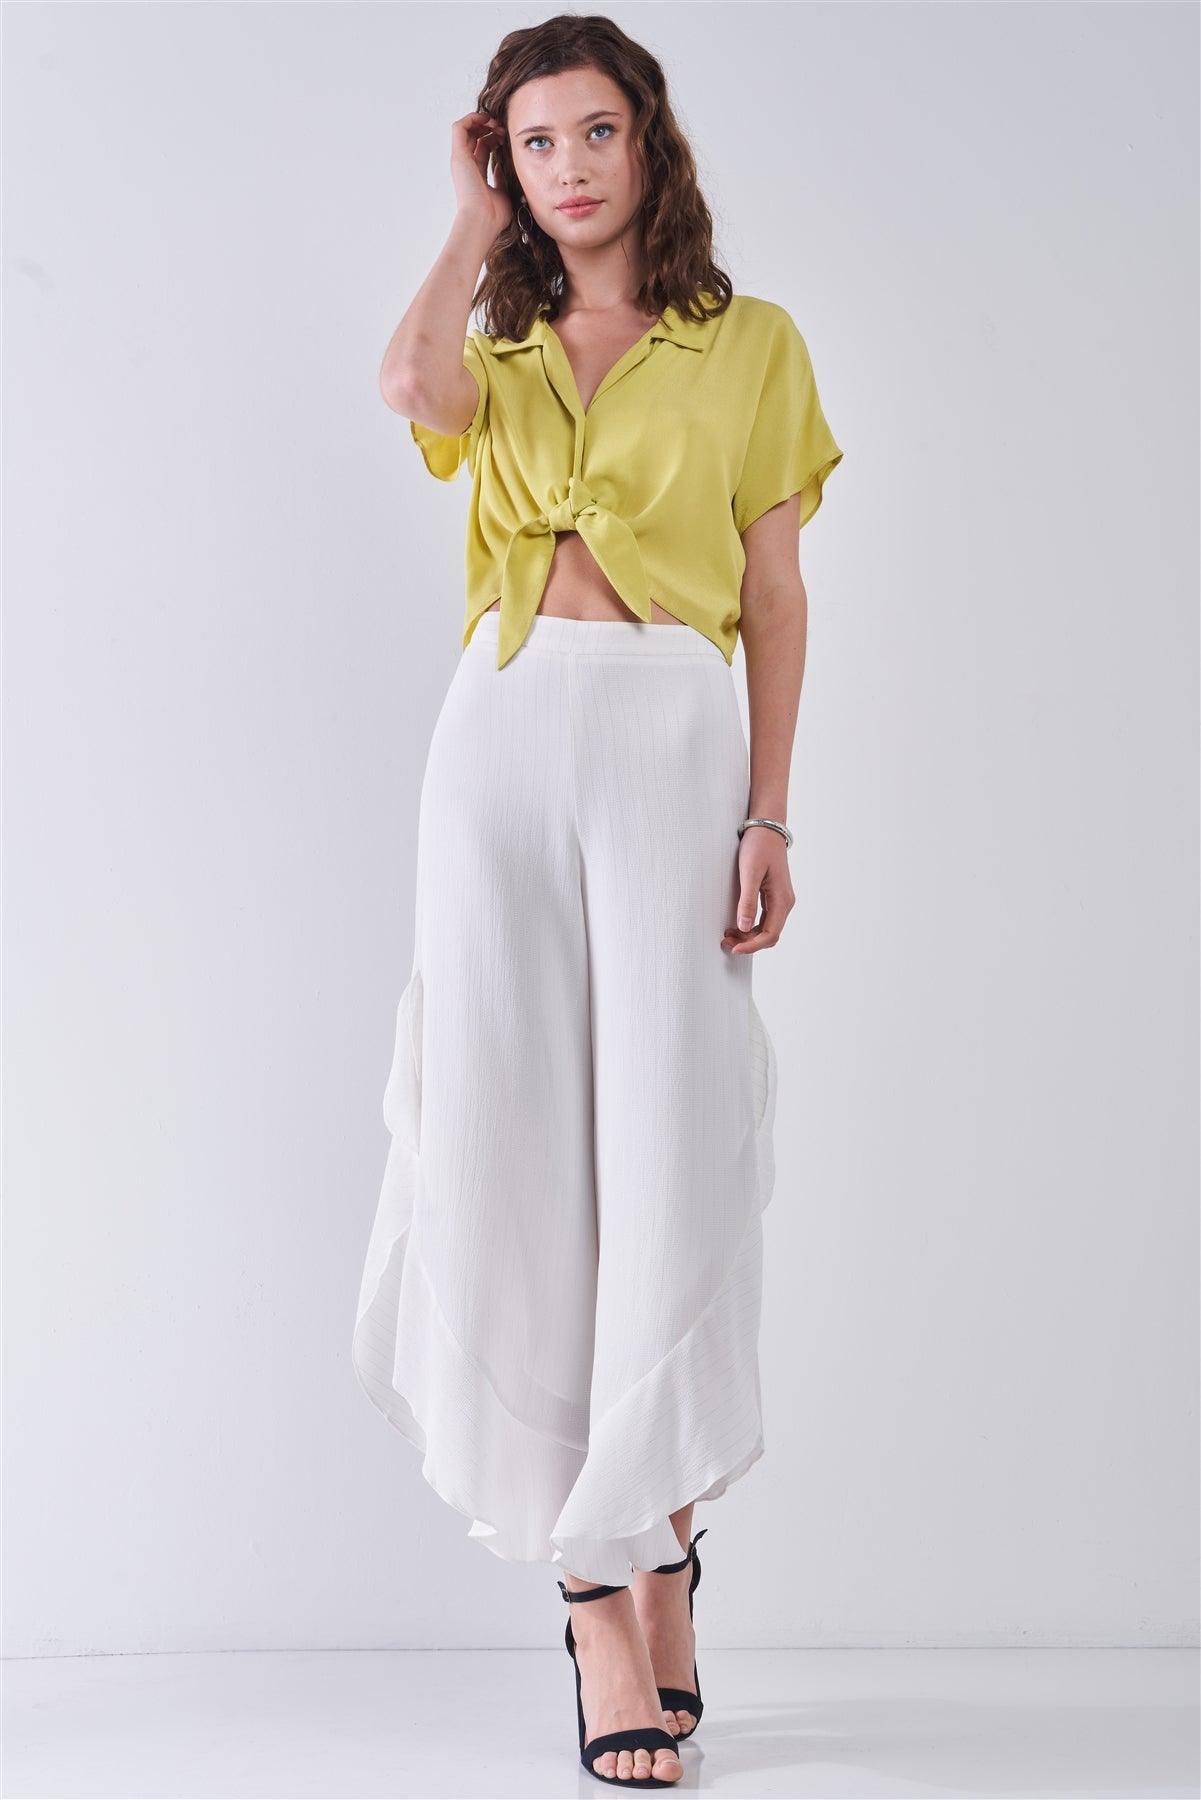 Pineapple Collared Short Sleeve Self-Tie Front Cropped Top